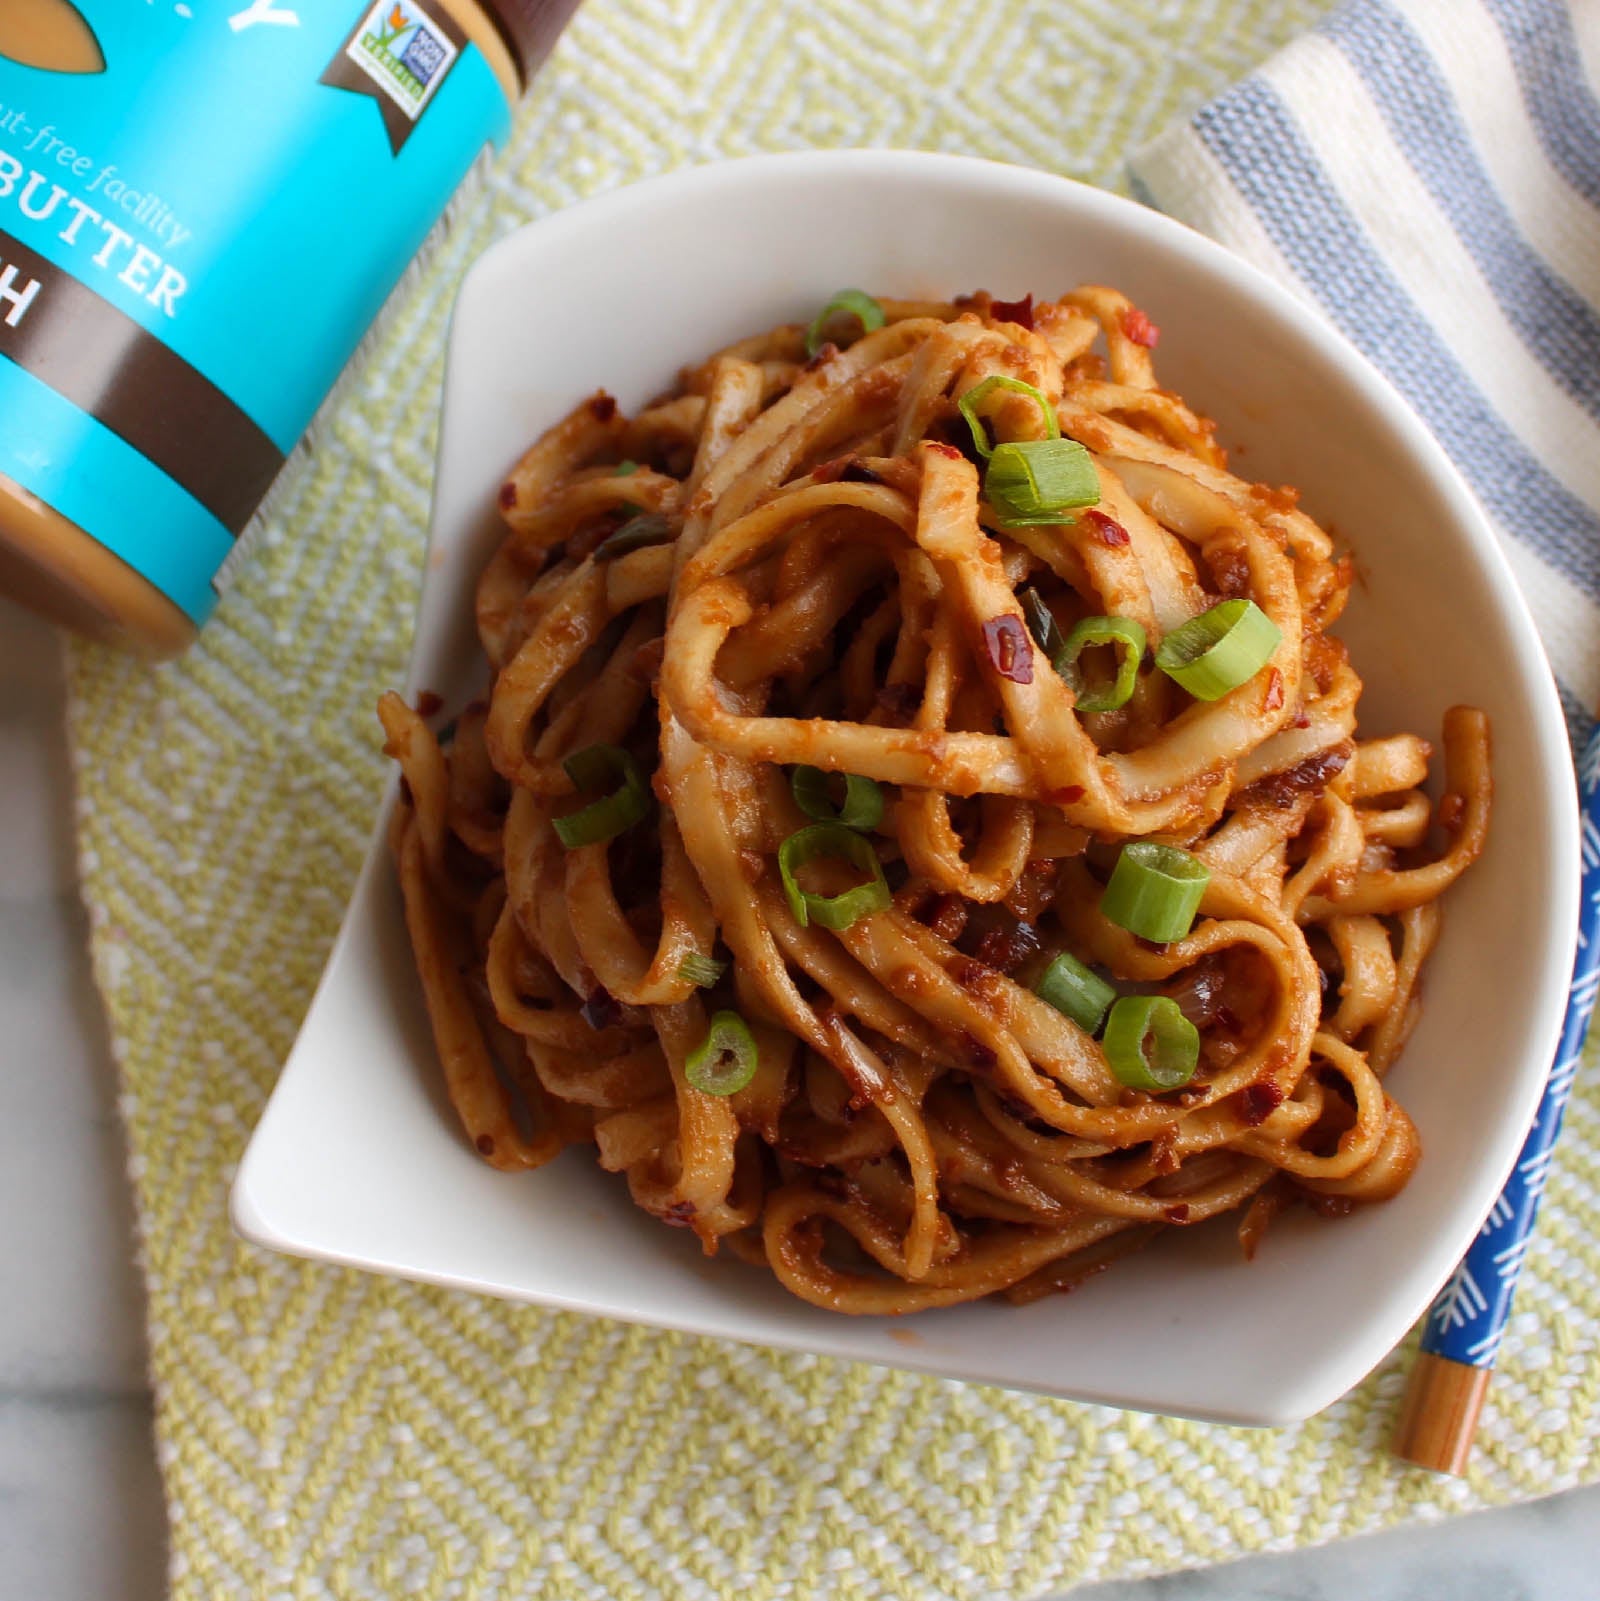 Chili Almond Butter Noodles